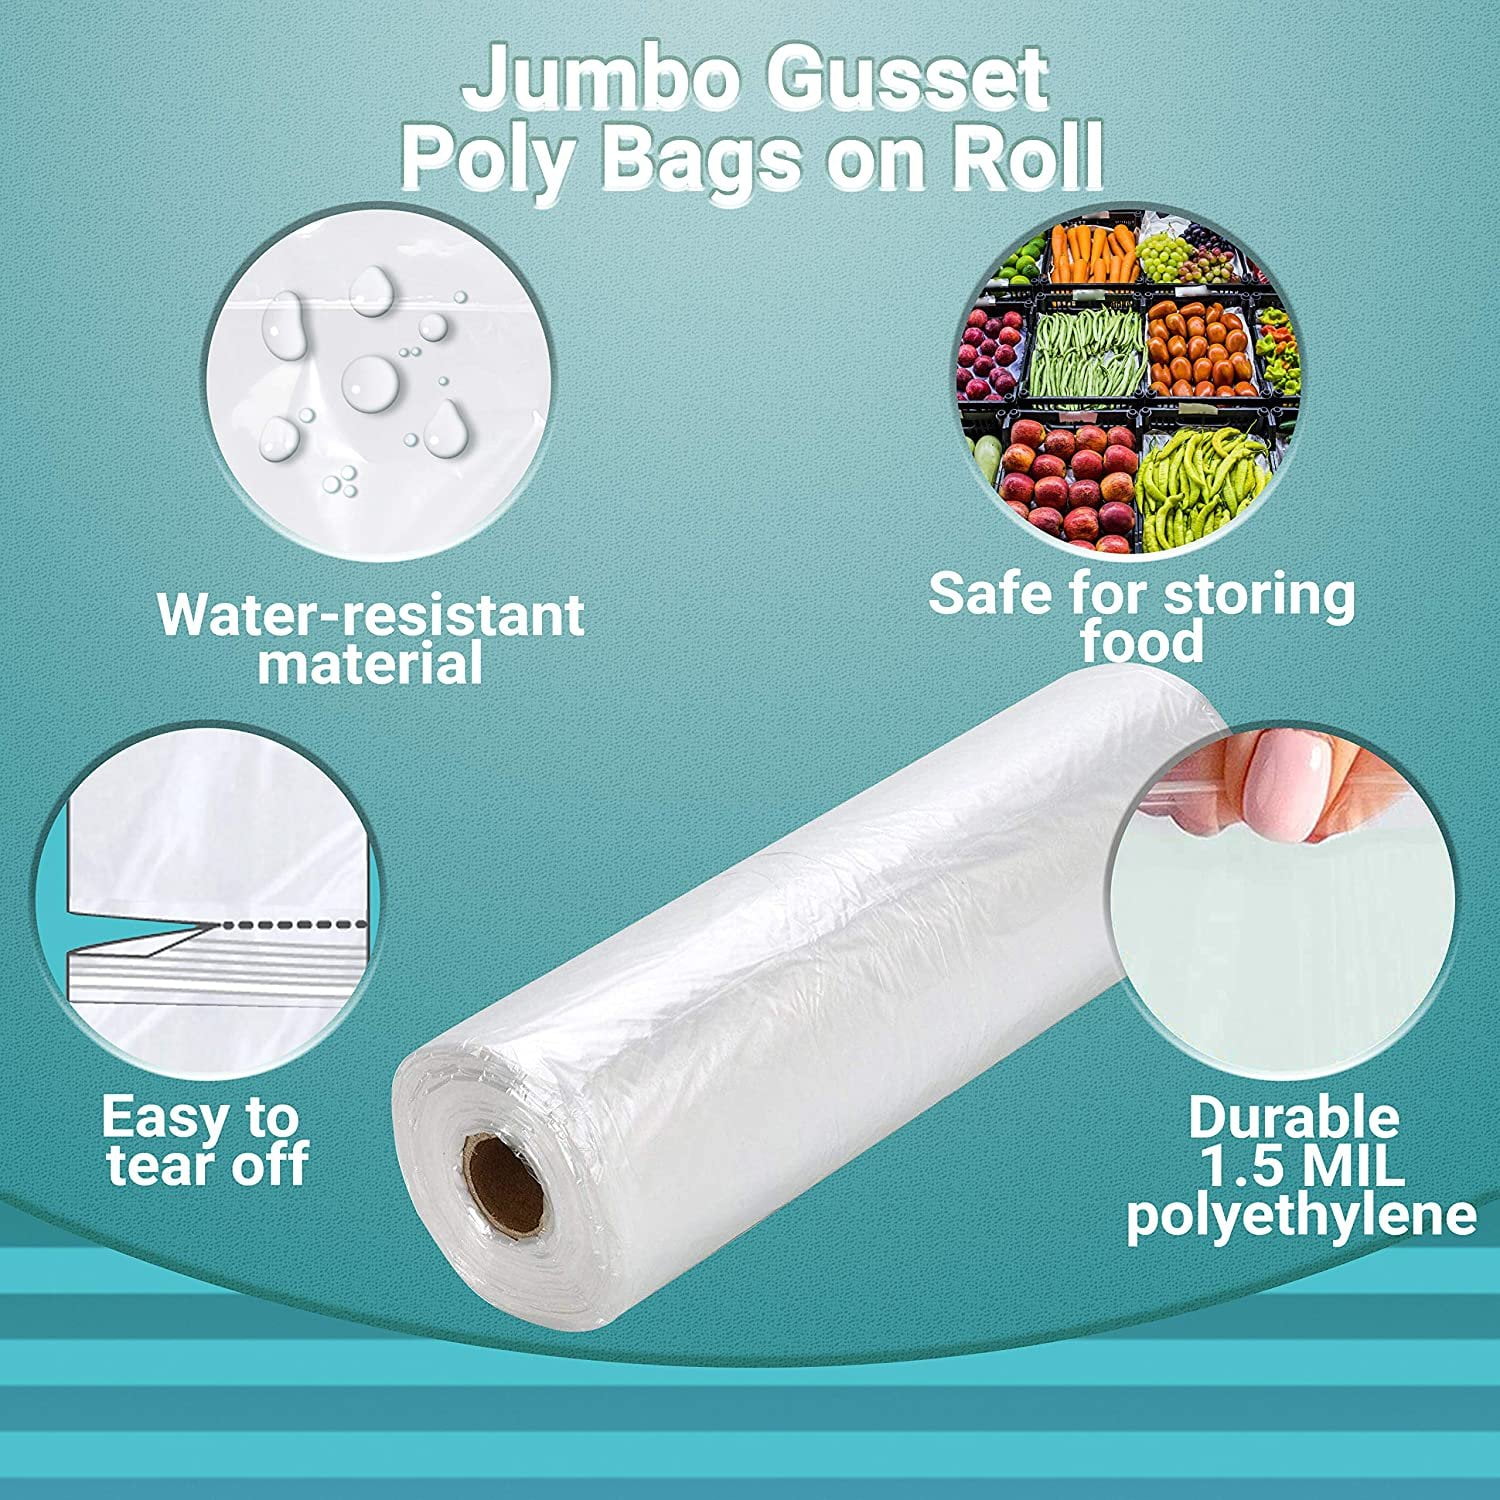 Dropship Pack Of 600 Jumbo Gusset Poly Bags On Roll 12 X 10 X 30. Large  Perforated Clear Bags 12x10x30. Thickness 2 Mil. Expandable Plastic Bags  For Industrial; Food Service; Health Needs.